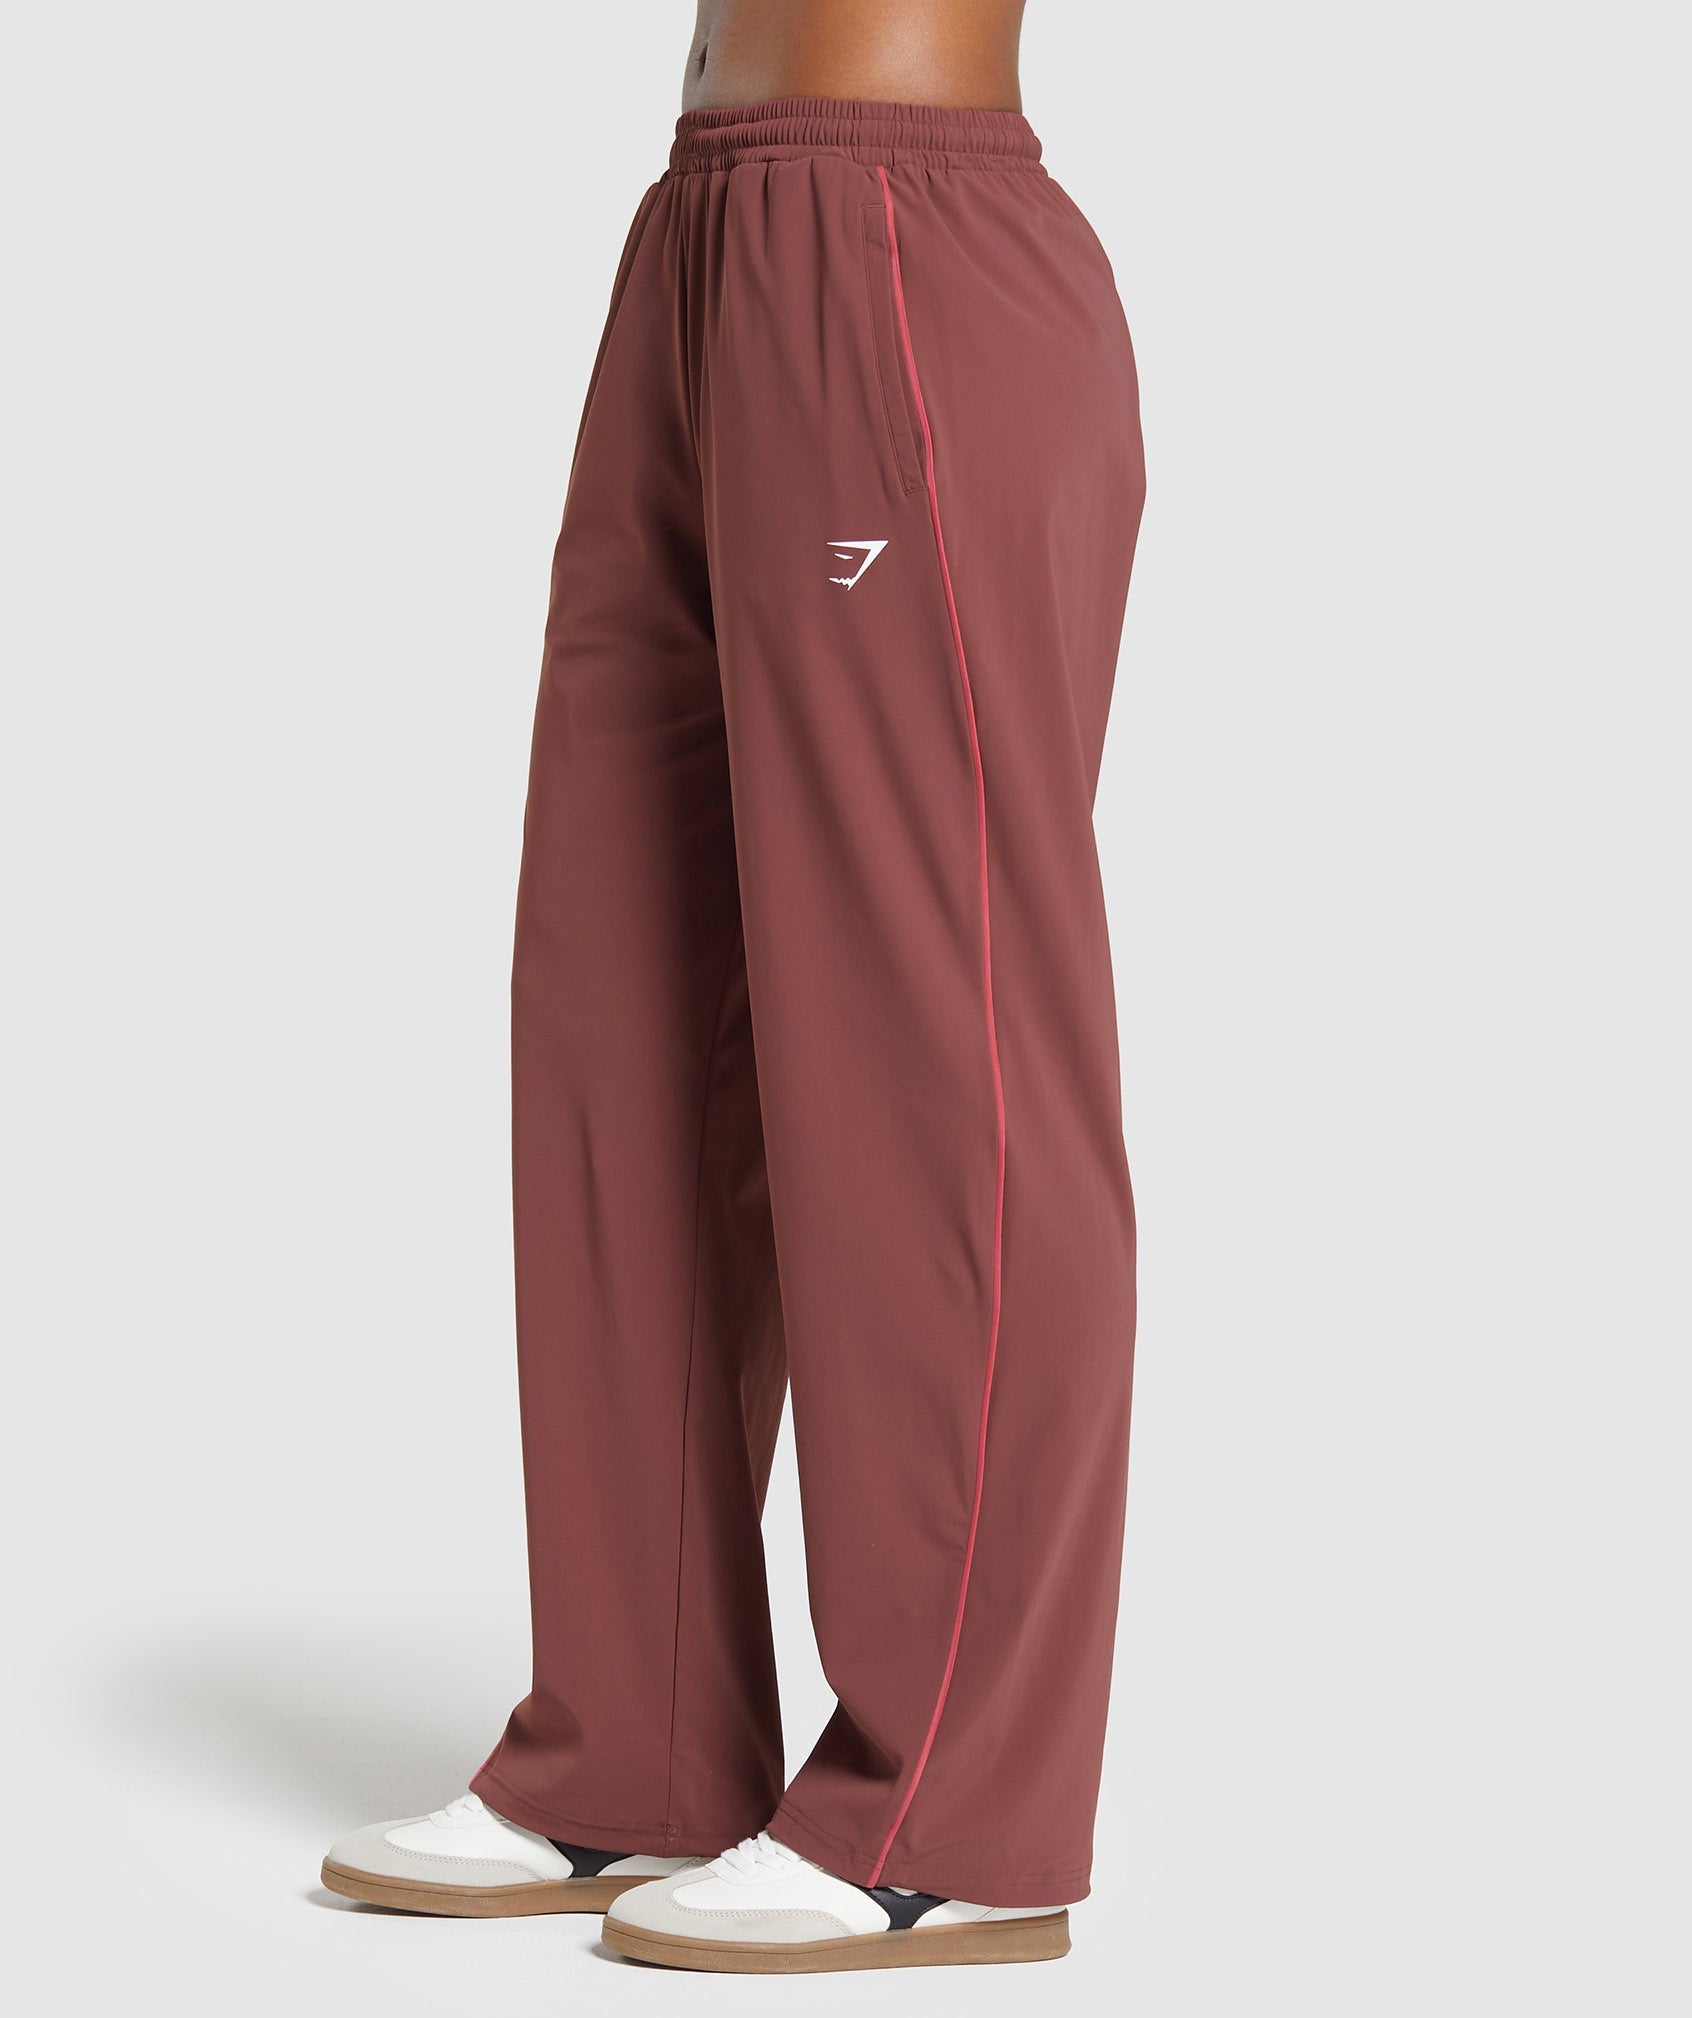 Stitch Feature Woven Pants in Burgundy Brown - view 3